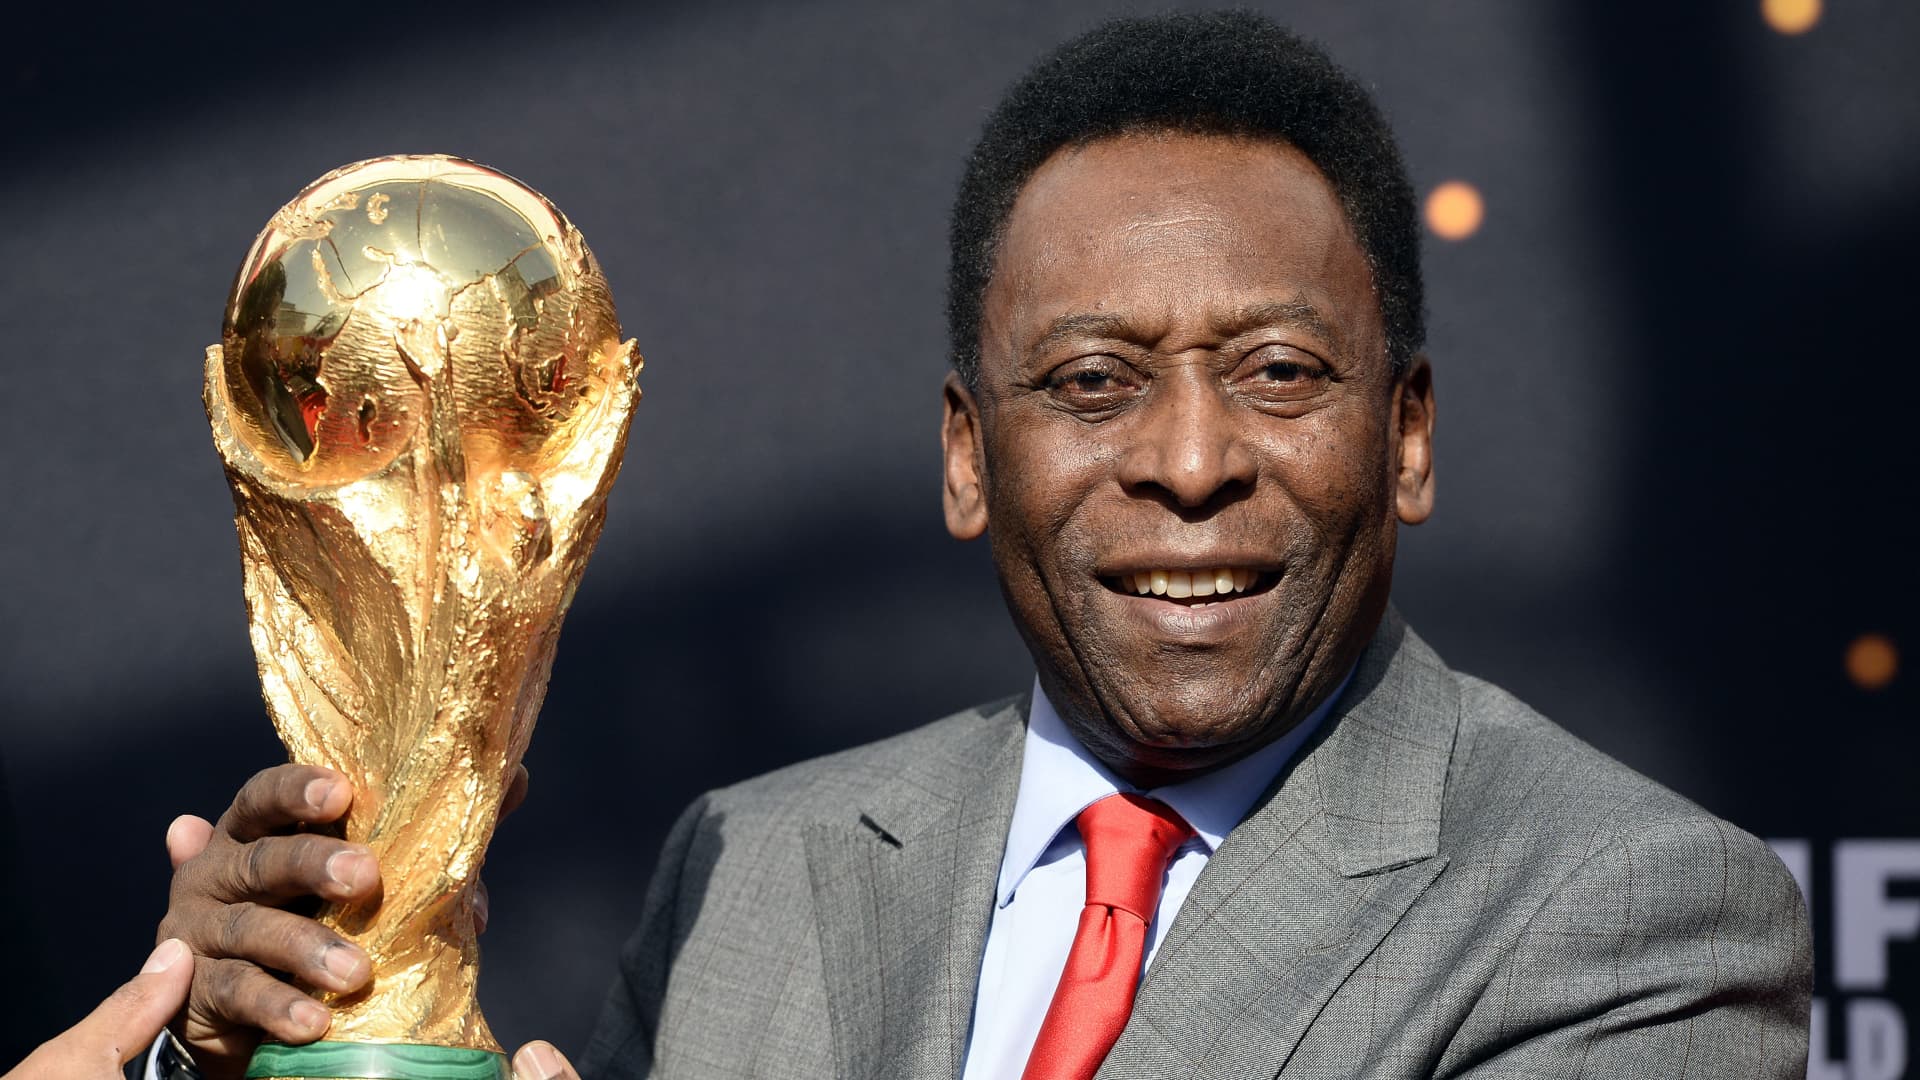 Pelé, Brazilian soccer star and only player to win the World Cup three times, dies at age 82